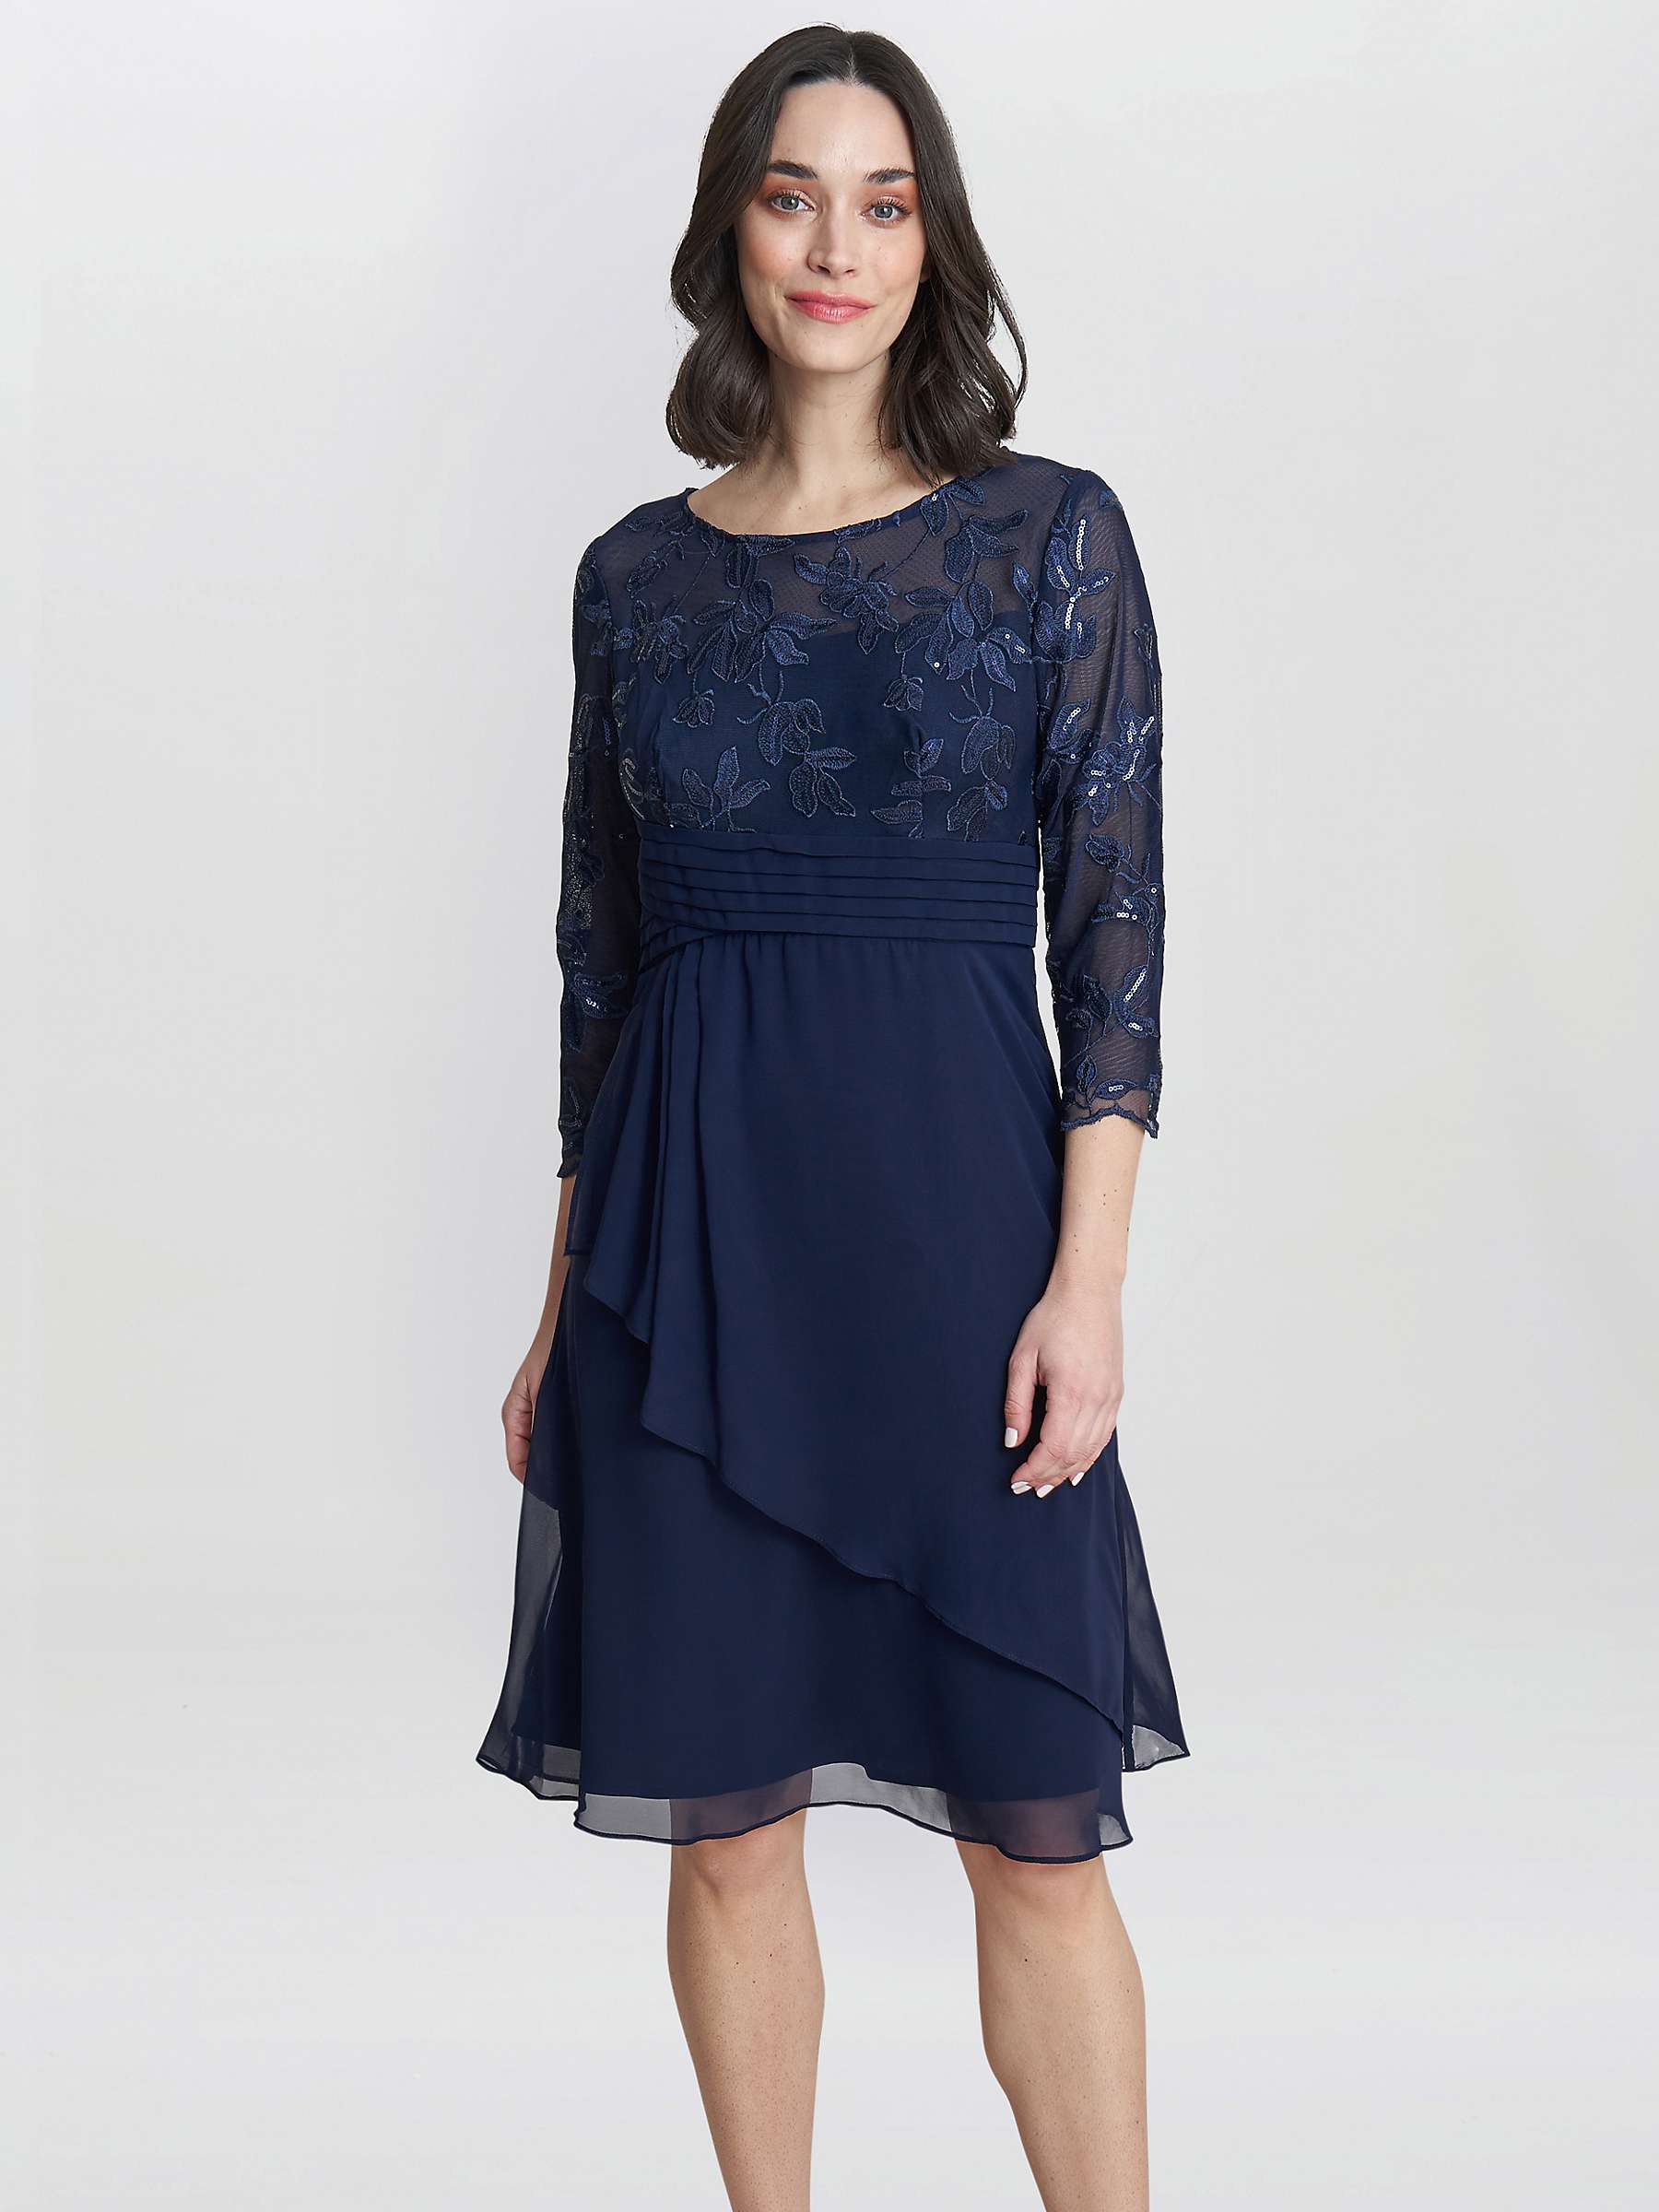 Buy Gina Bacconi Petite Thandie Embroidered Bodice Dress, Navy Online at johnlewis.com